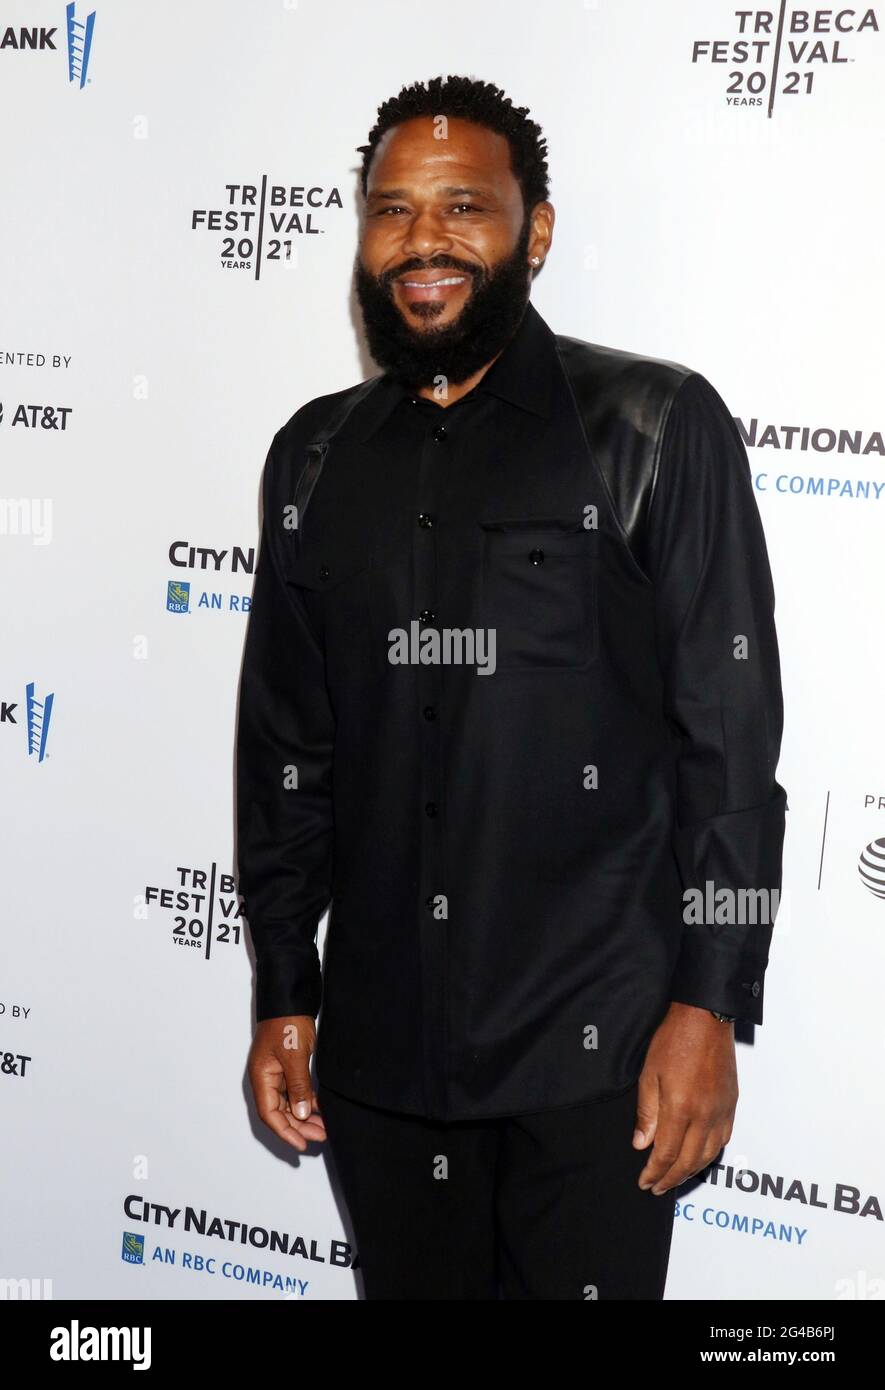 New York, NY, USA. 19th June, 2021. Anthony Anderson at the Tribeca Film Festival Closing Night Celebration premiere of Untitled: Dave Chappeile Documentary at Radio City Music Hall in New York City on June 19, 2021. Credit: Rw/Media Punch/Alamy Live News Stock Photo